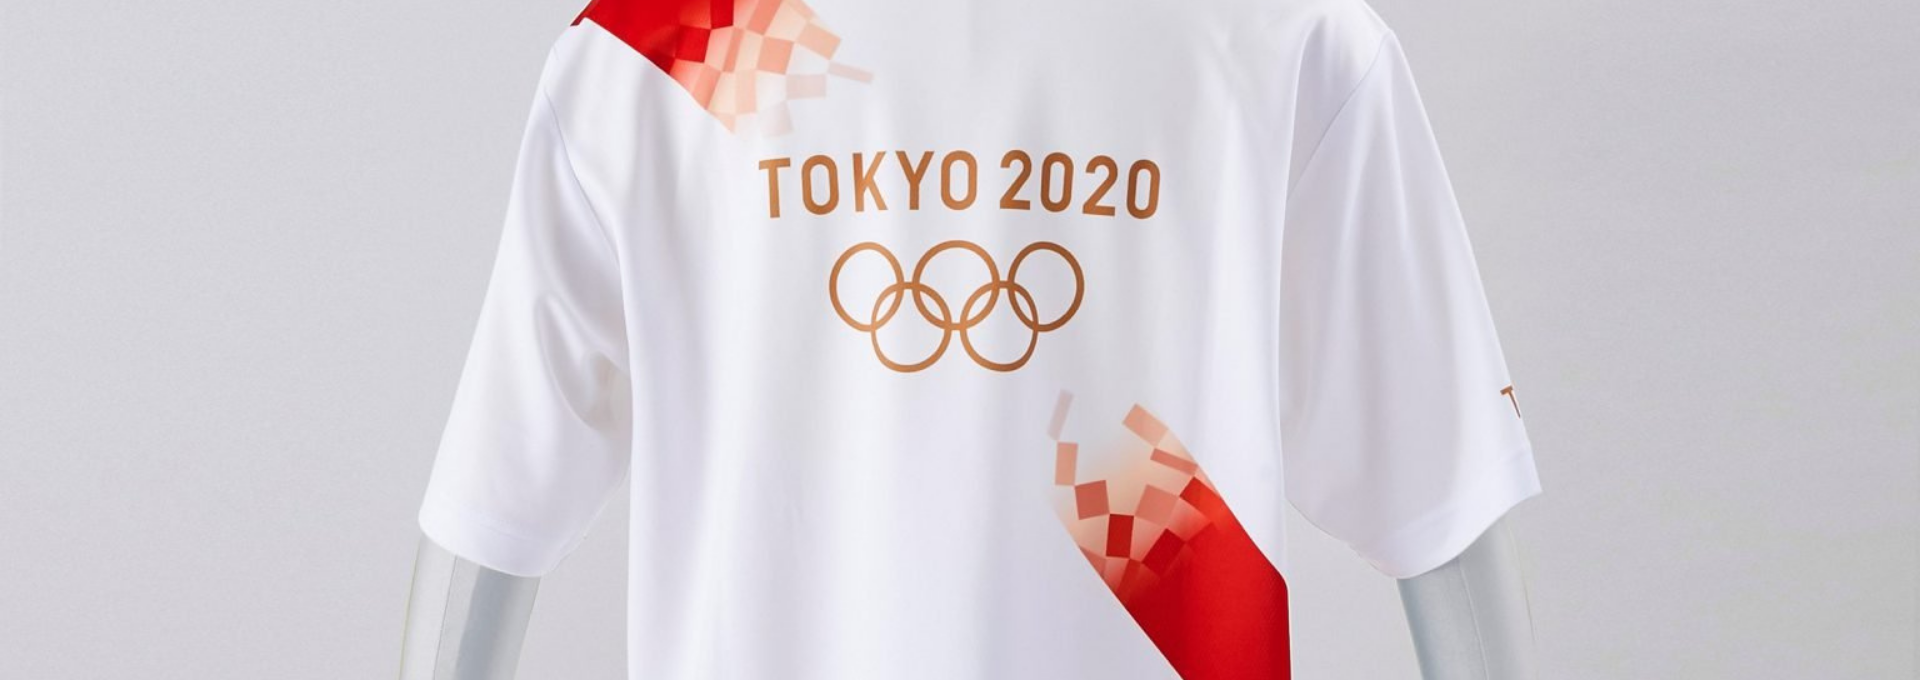 Tokyo Olympic torchbearers wear uniforms made from recycle bottles